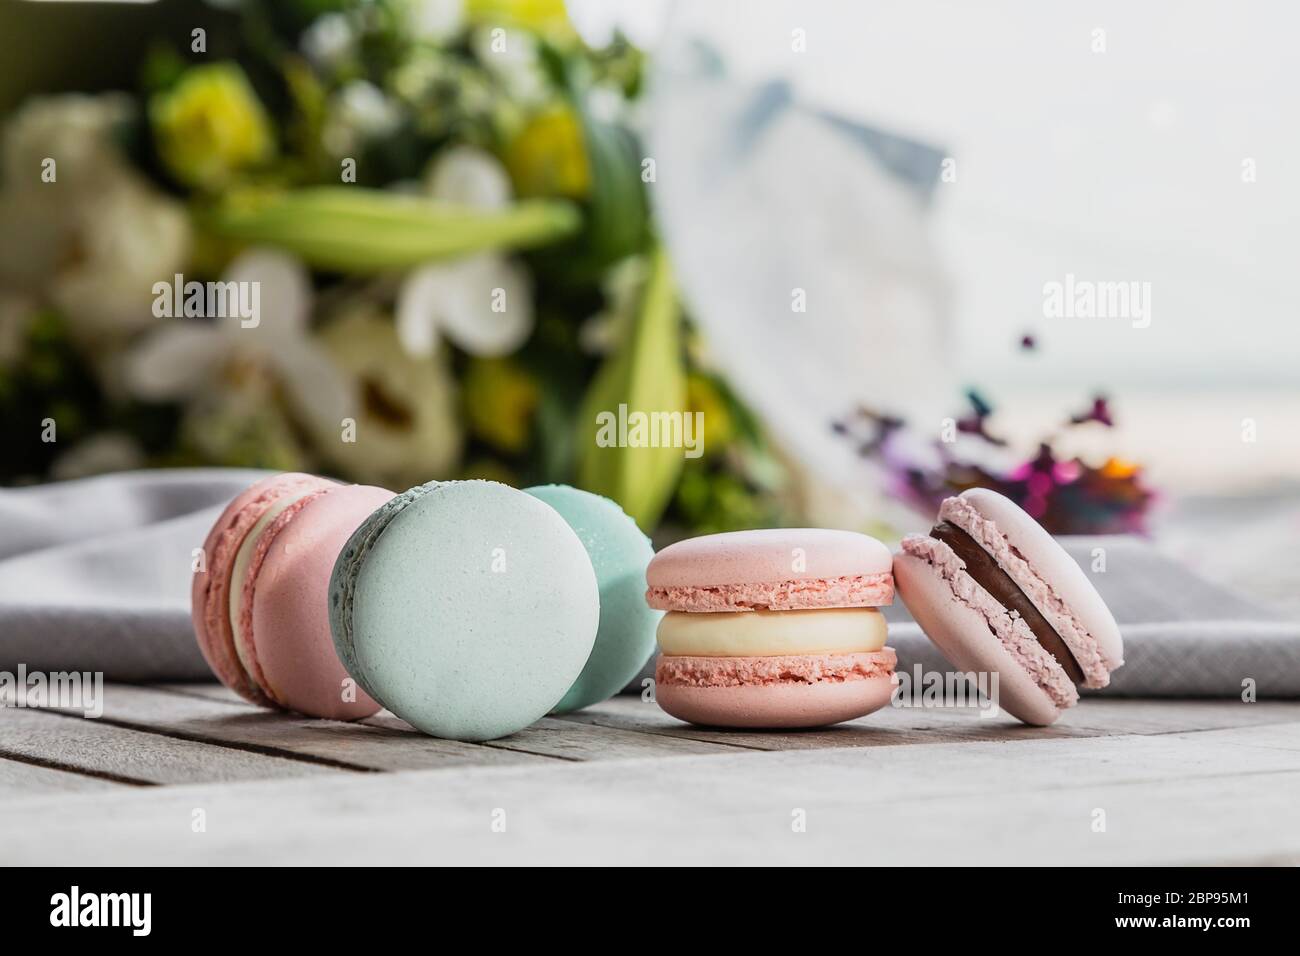 Homemade Fresh Colorful French macarons cake, on natural concrete wooden background. Food concept with copy space. Horizontal image Stock Photo